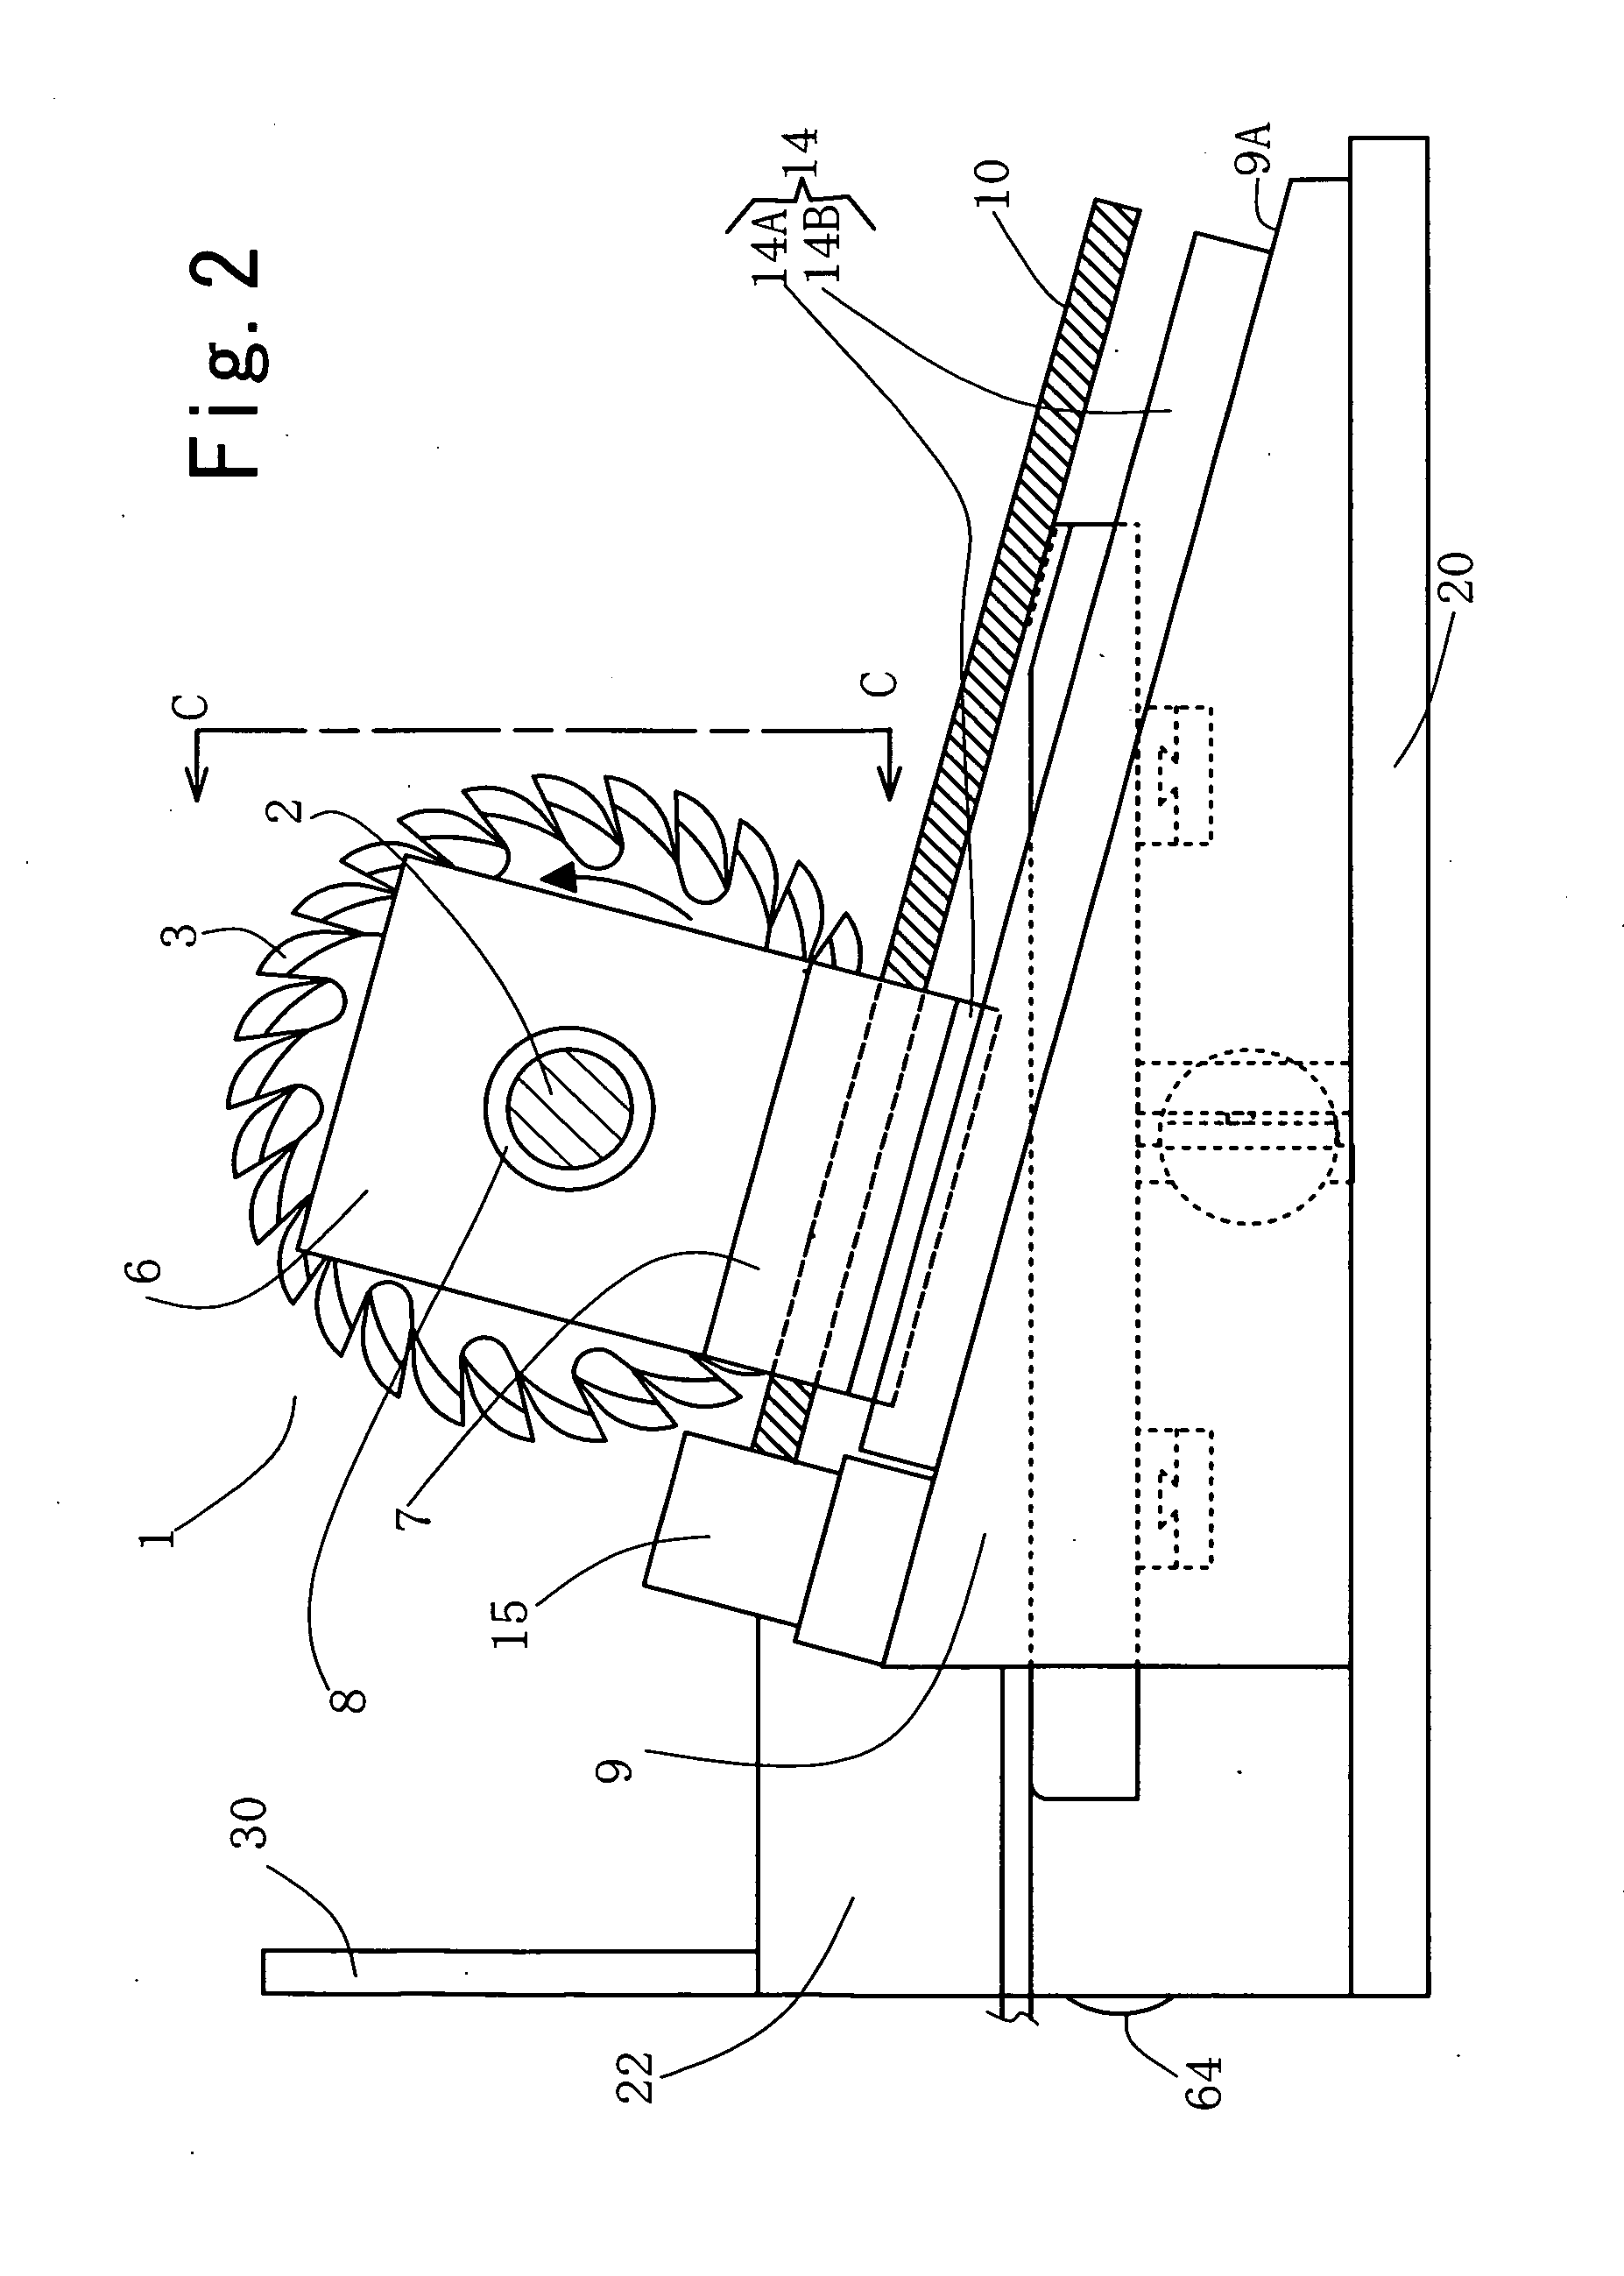 Method for forming a bevel cut at an end of a wood member